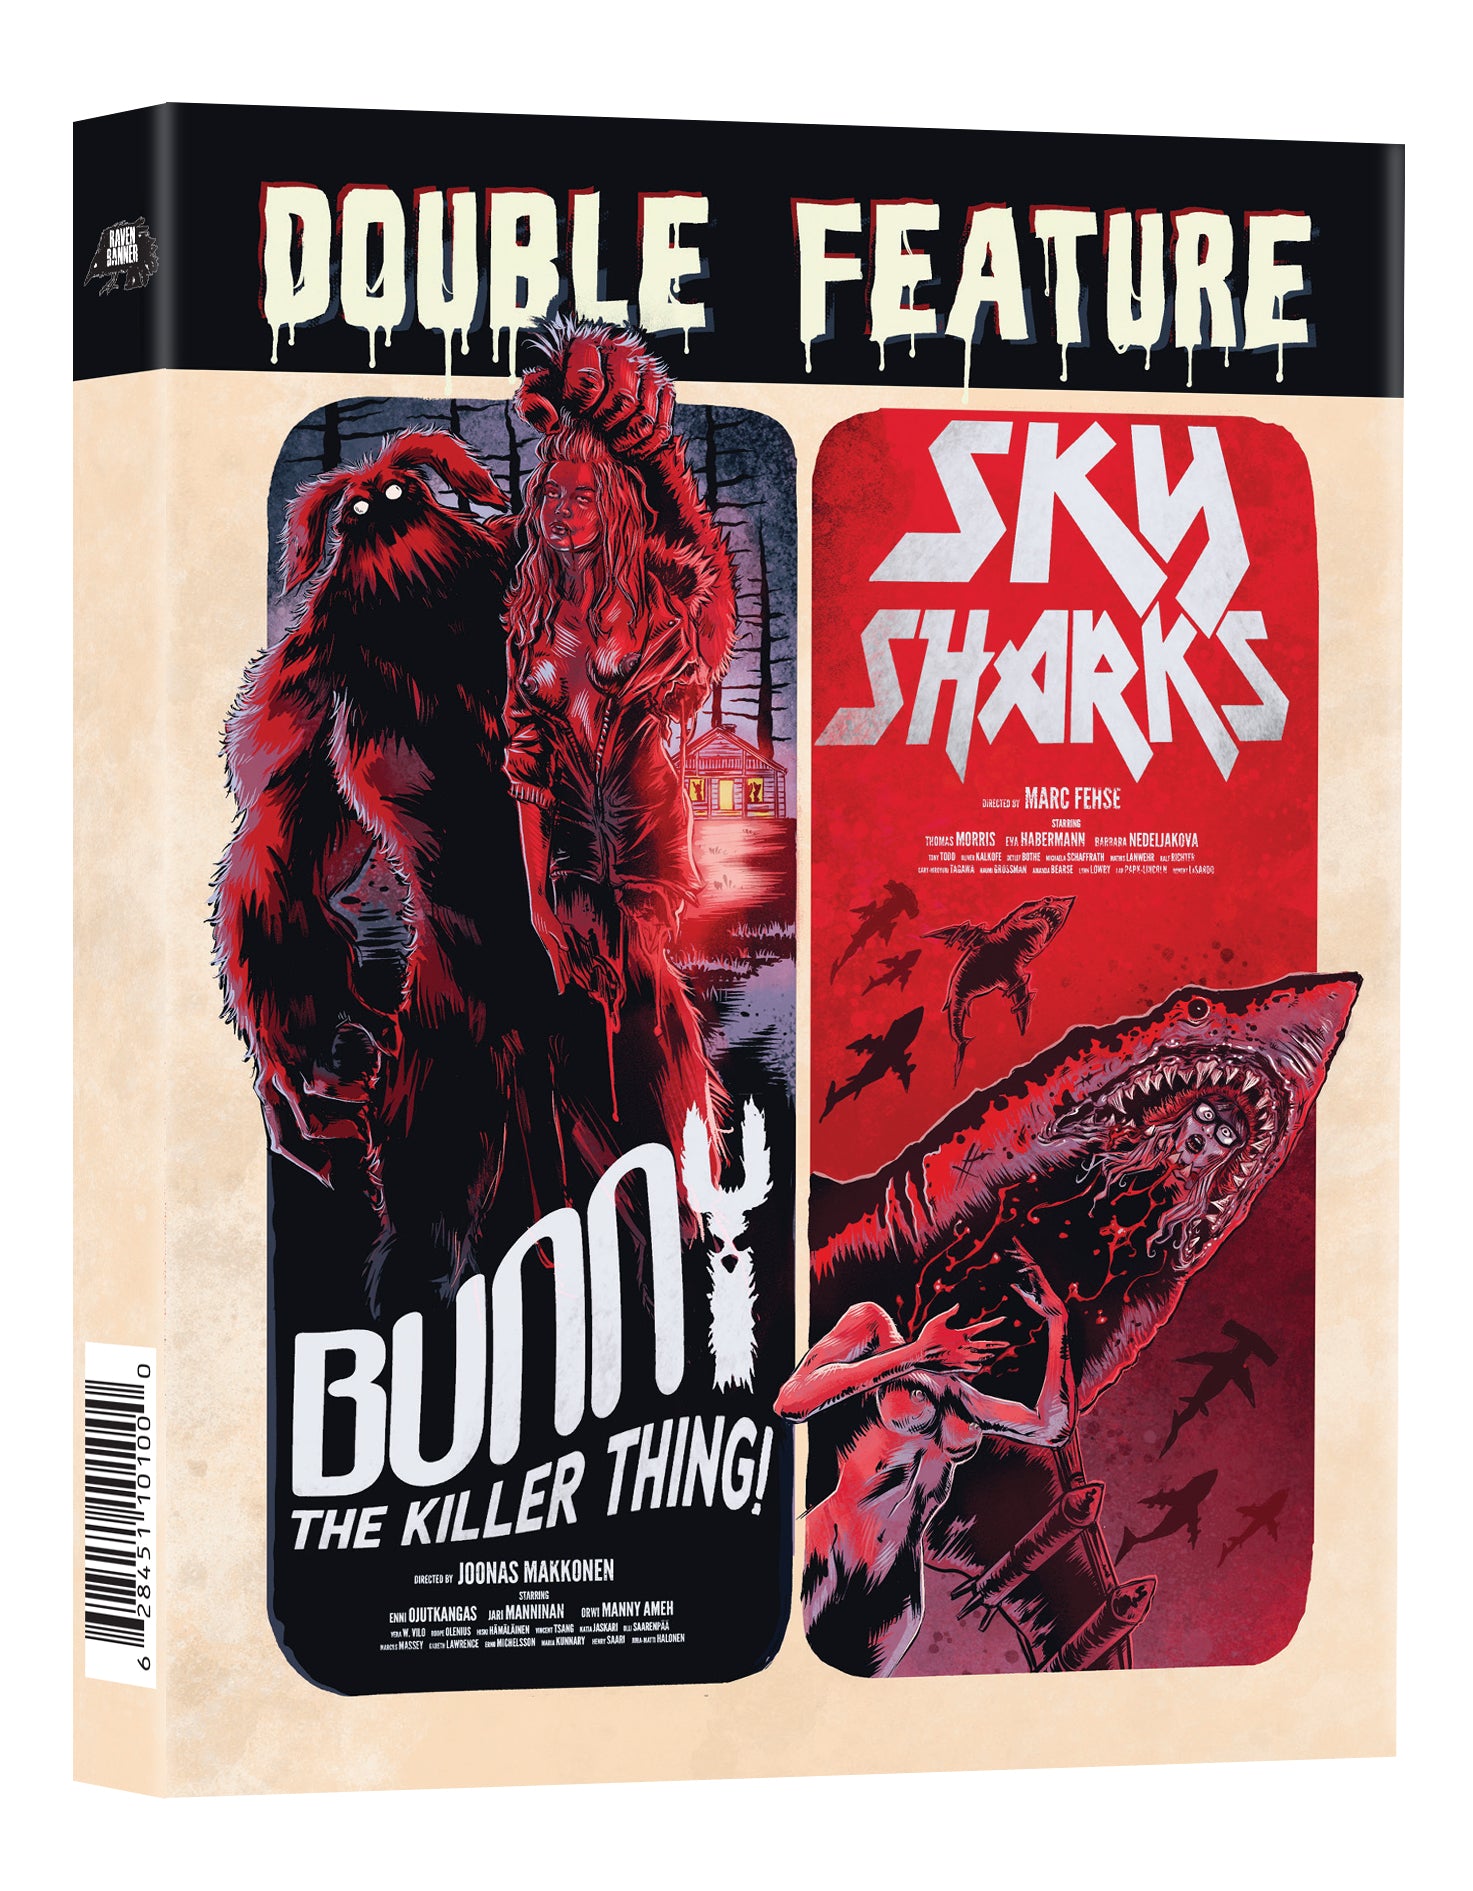 SKY SHARKS & BUNNY THE KILLER THING - DRIVE-IN DOUBLE FEATURE (BLU-RAY)